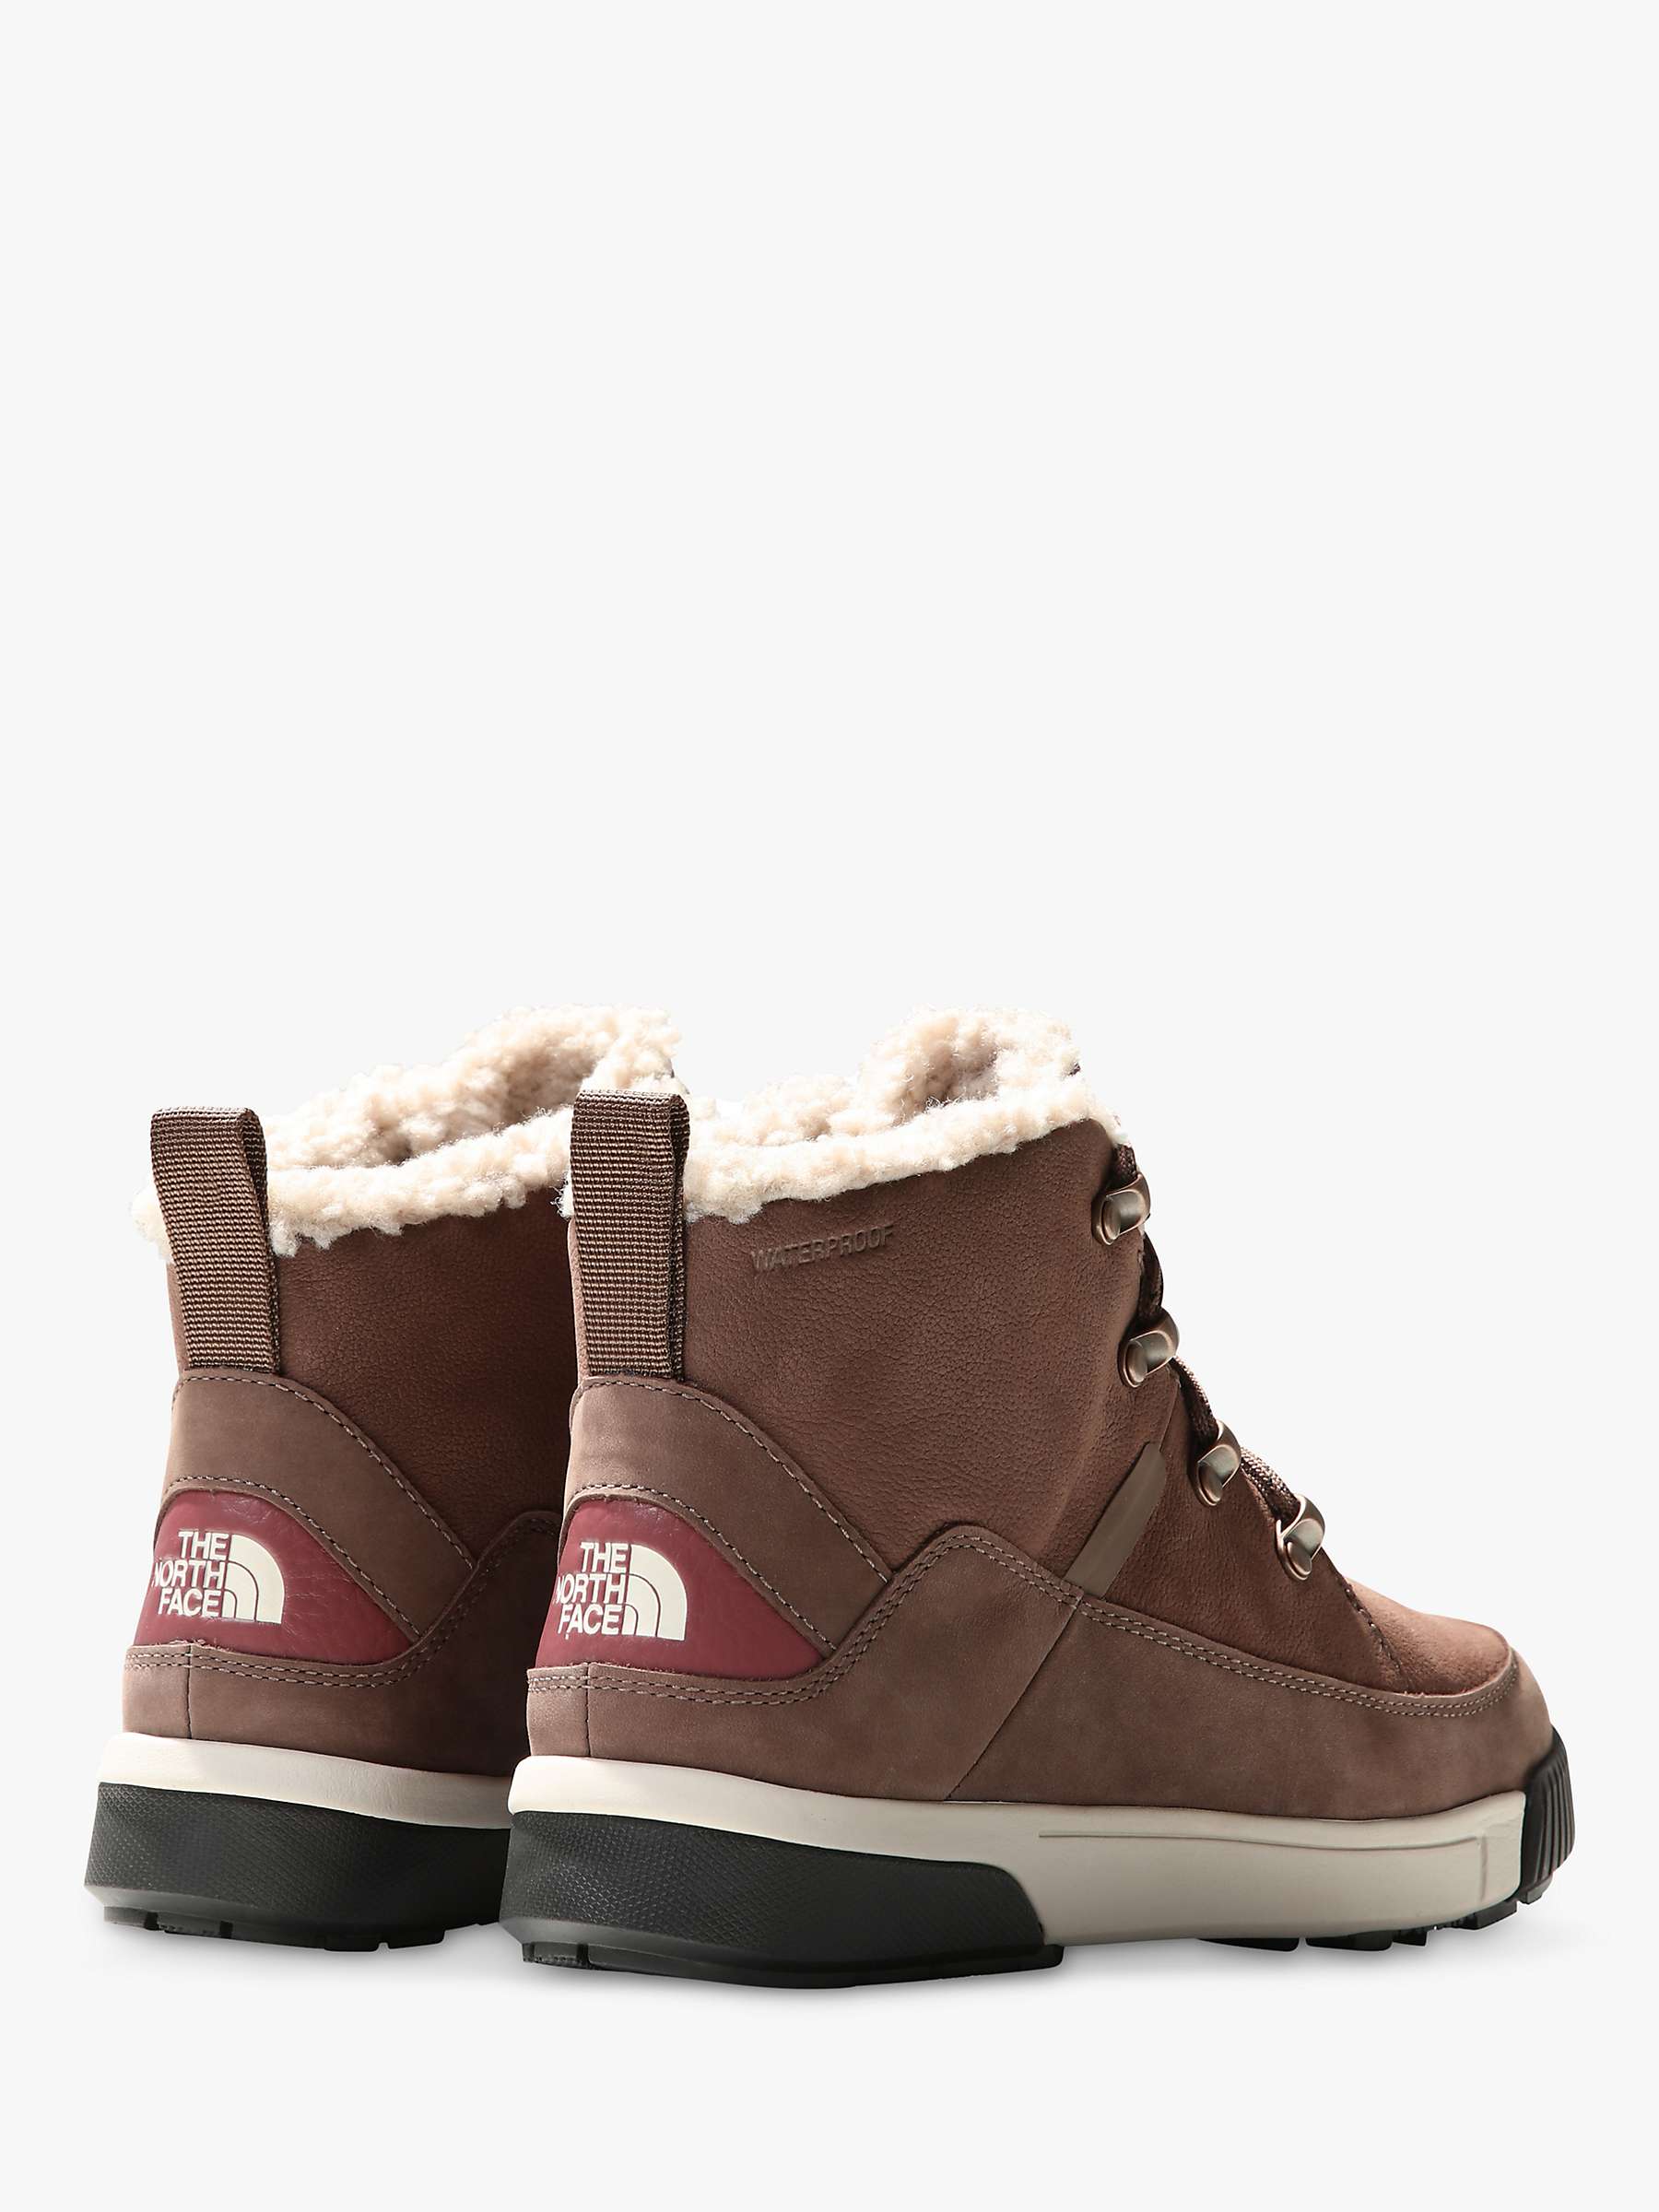 Buy The North Face Sierra Women's Walking Boots Online at johnlewis.com